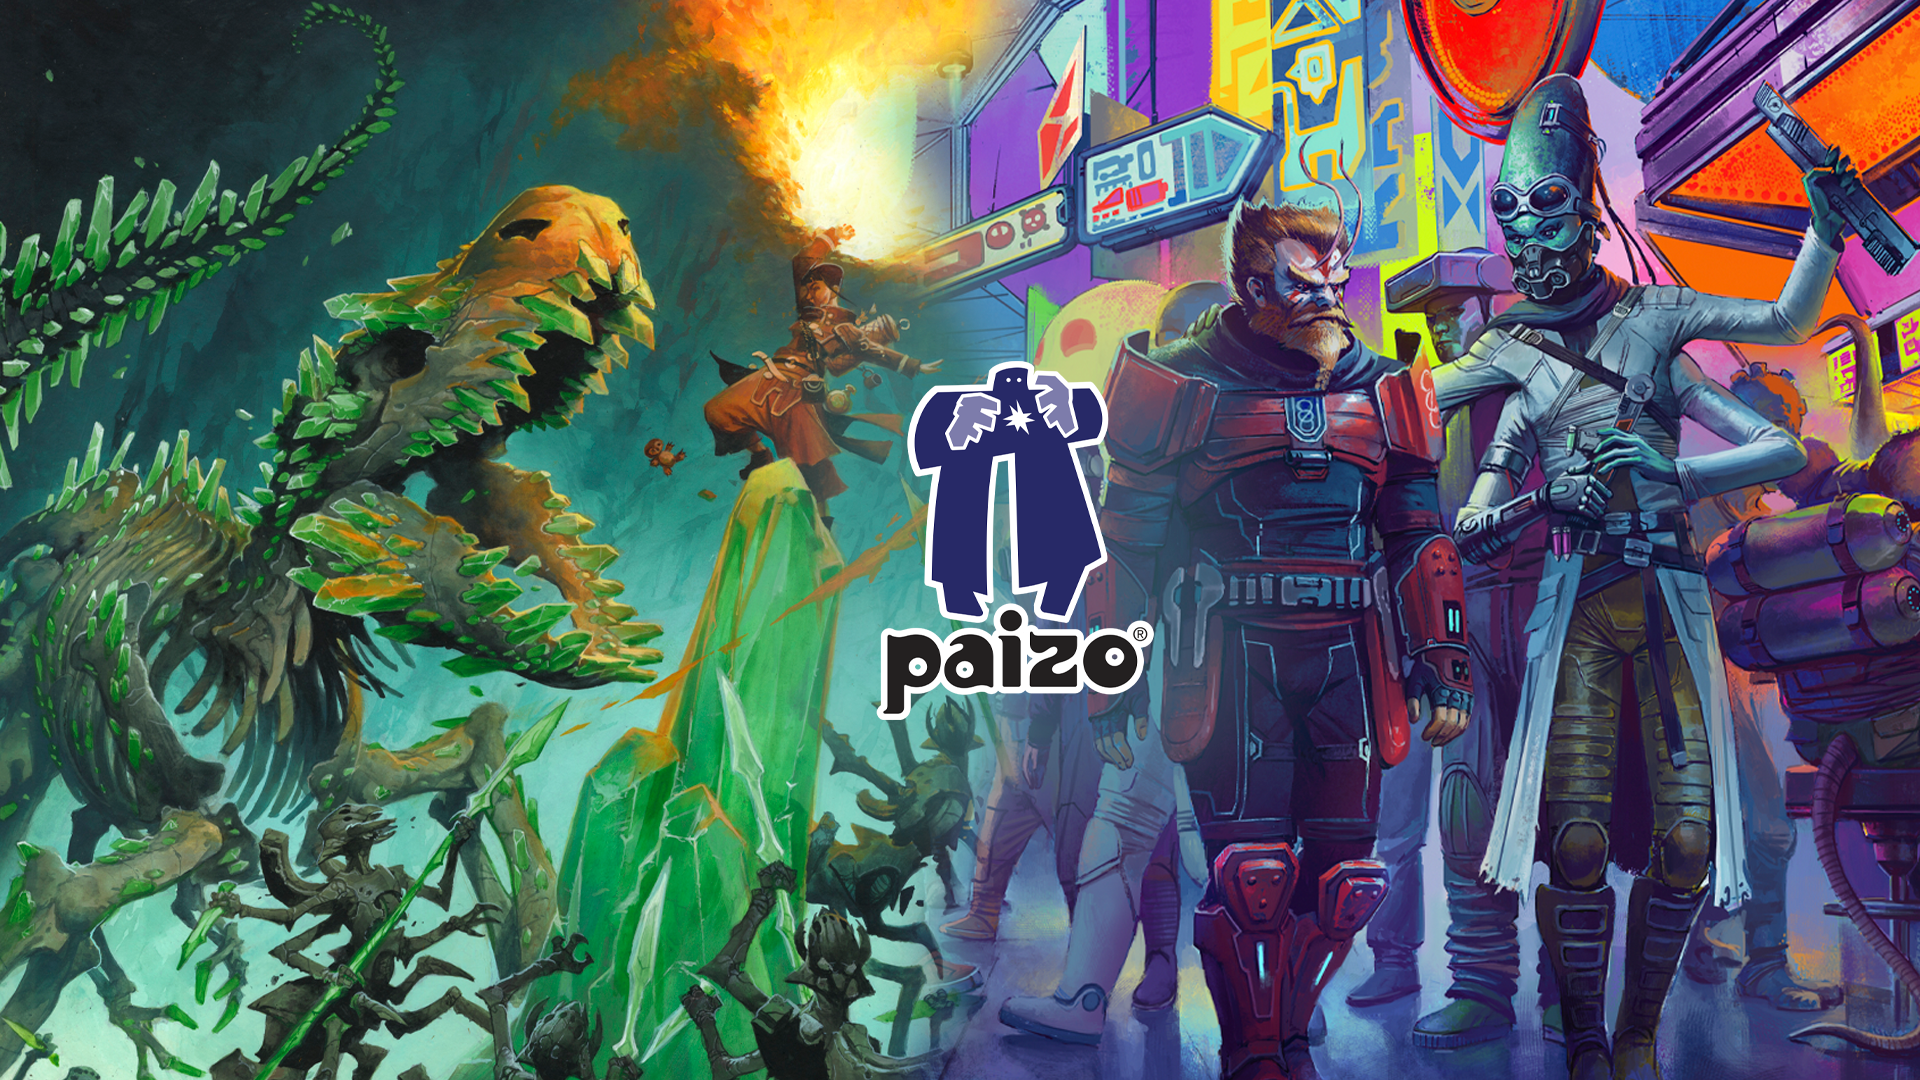 Combined images of the Pathfinder Rage of Elements and the Starfinder Ports of Call covers with the paizo logo overlayed over the top of both of them